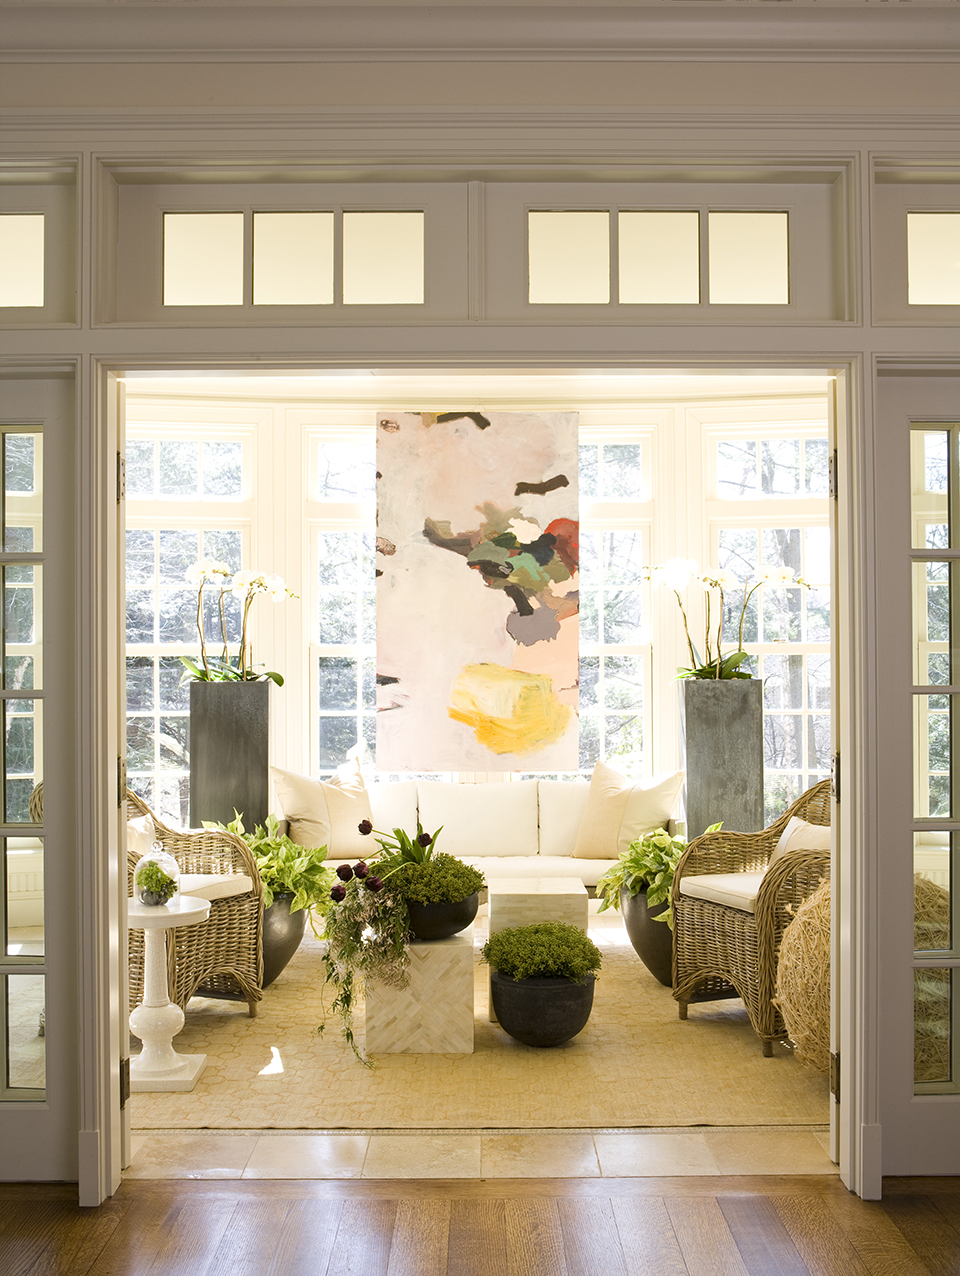 ABSTRACT ART PUNCTUATES A SOLARIUM AT A WINCHESTER HOME. PHOTOGRAPH BY KELLER & KELLER.